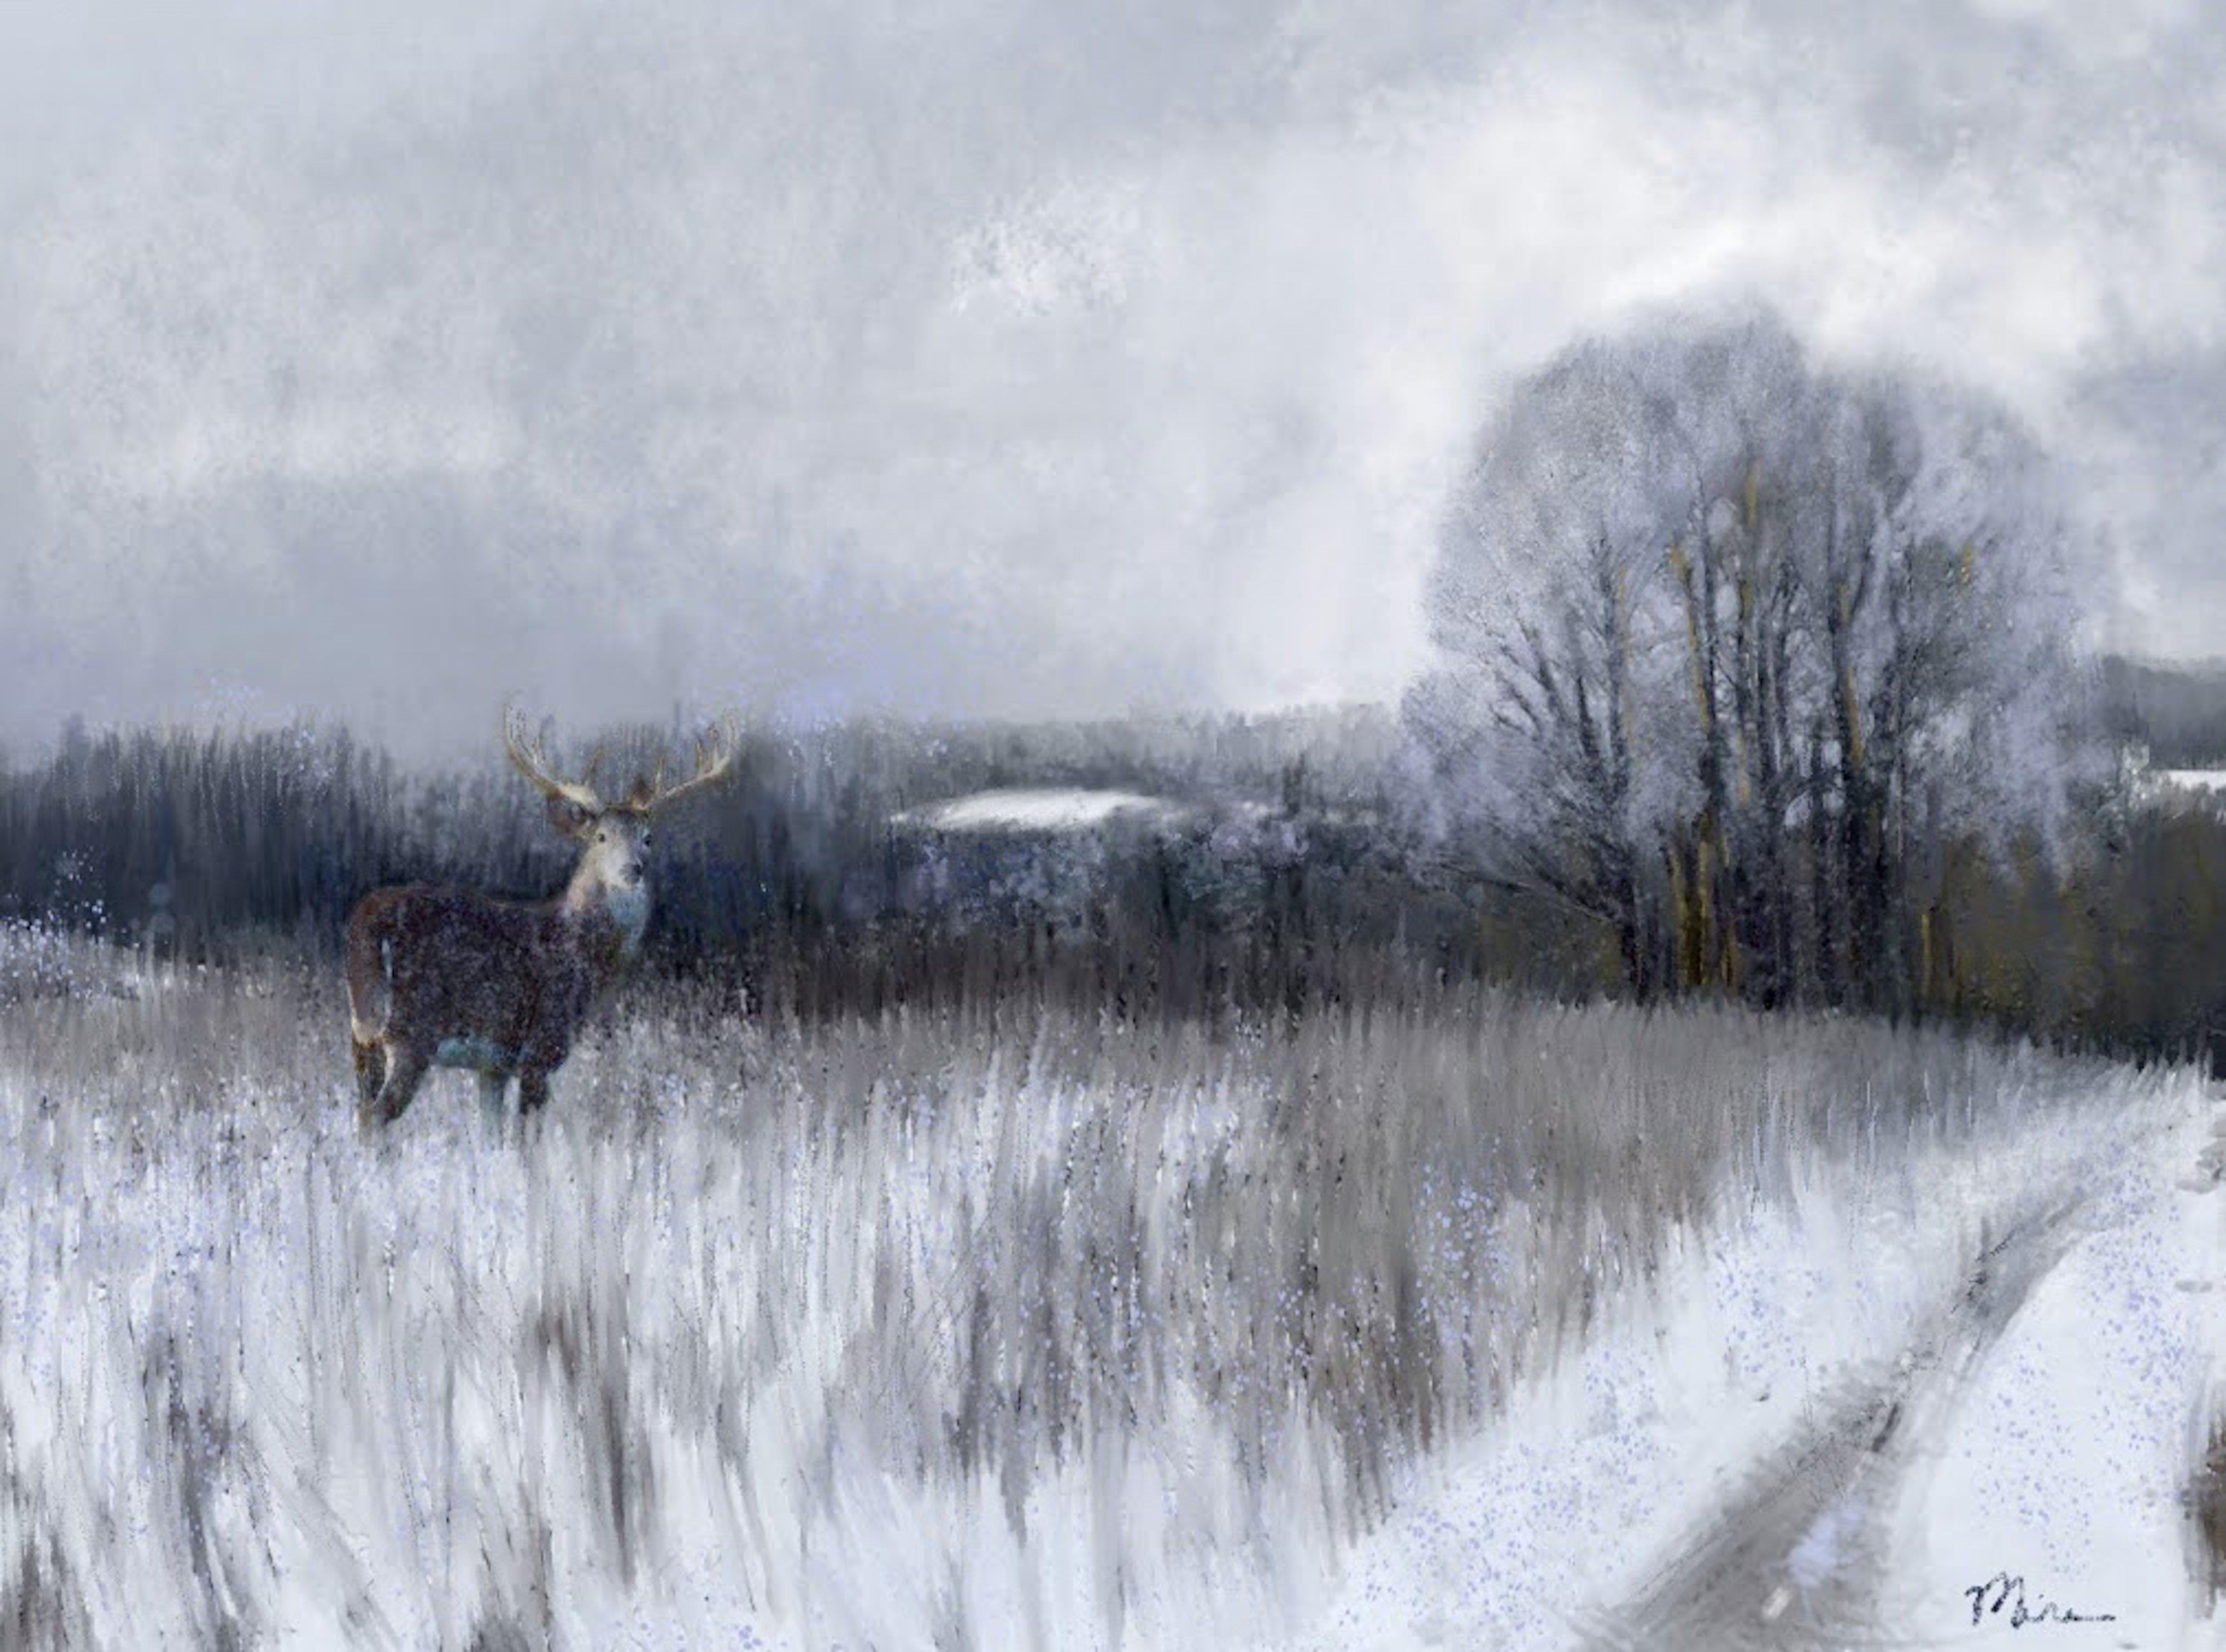 This piece is a painterly rendition of a deer standing within an atmospheric field of snow. The paper is a unique combination of high quality printing, distinctive gouche brush strokes and lines, with embellished ink and texture facilitated by the